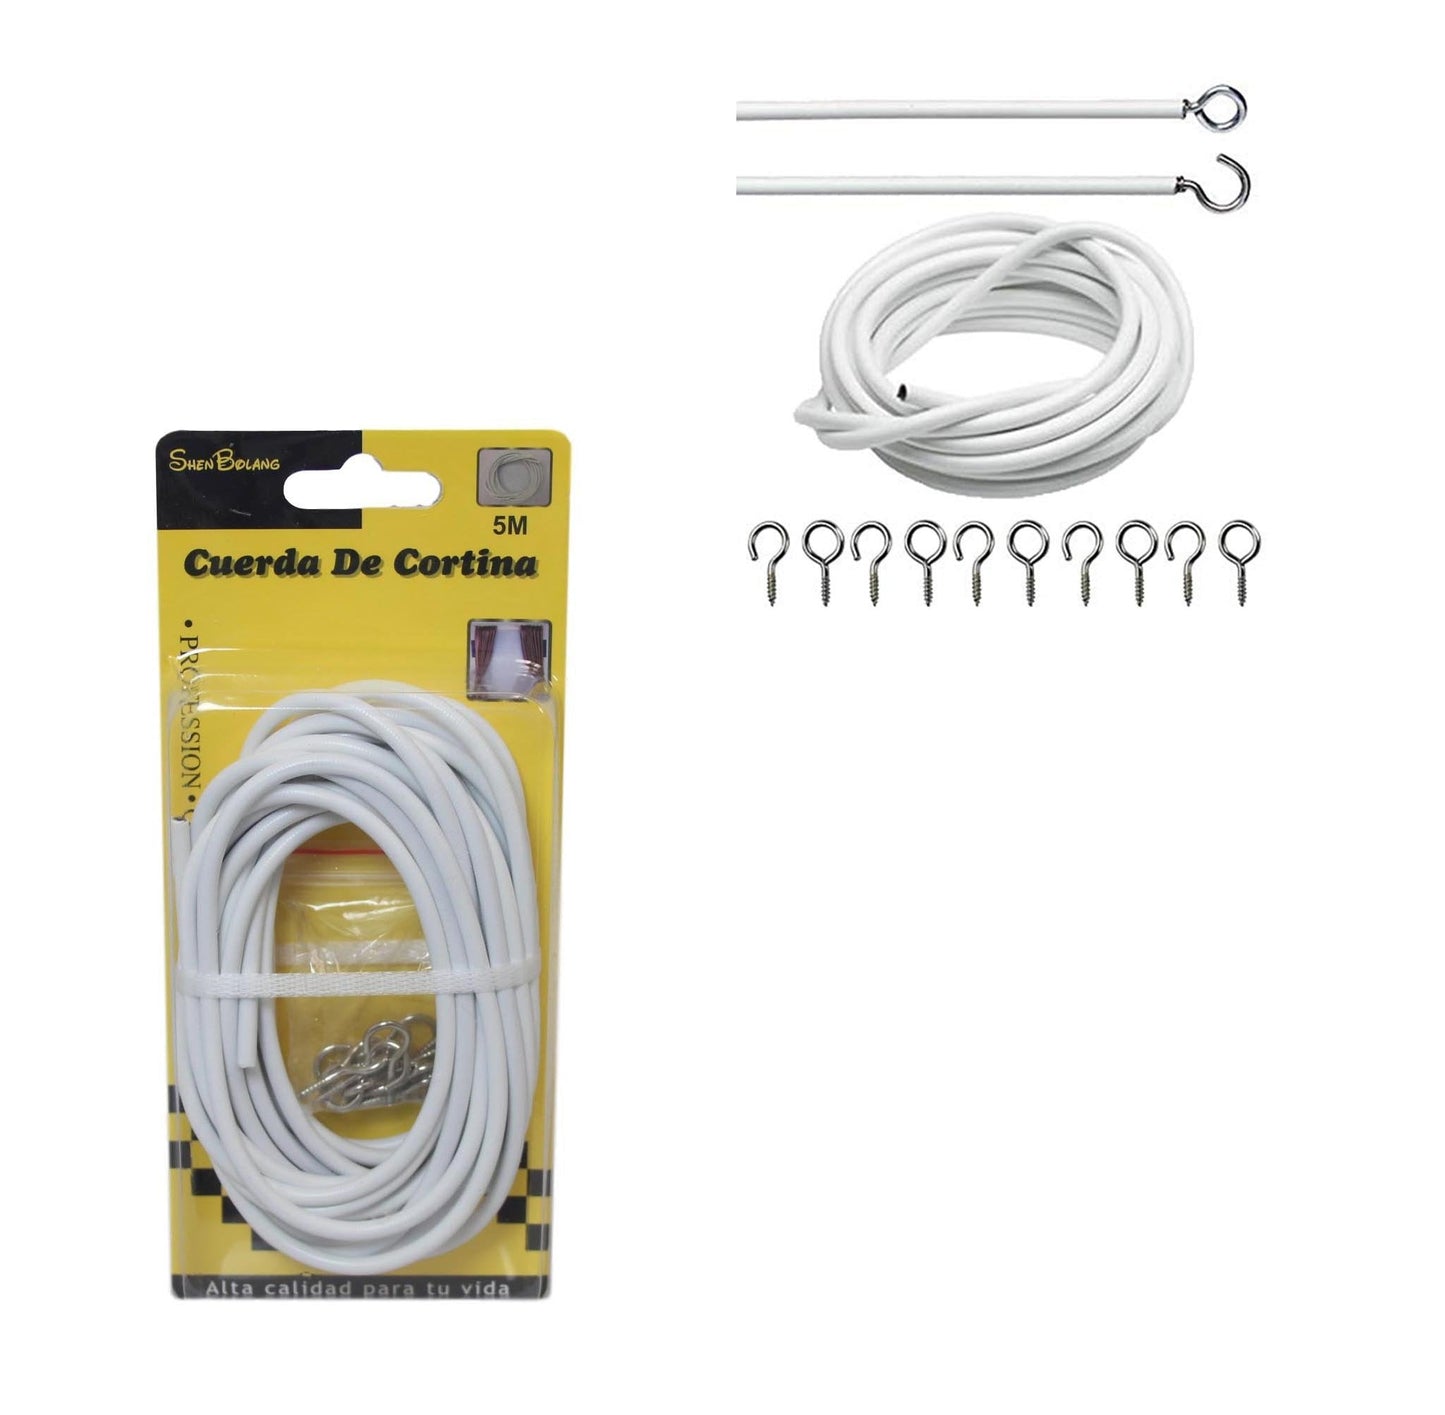 Net Curtain Wire White Window Cord Cable With Hooks Indoor Outdoor 5m Cable 60964 (Parcel Rate)